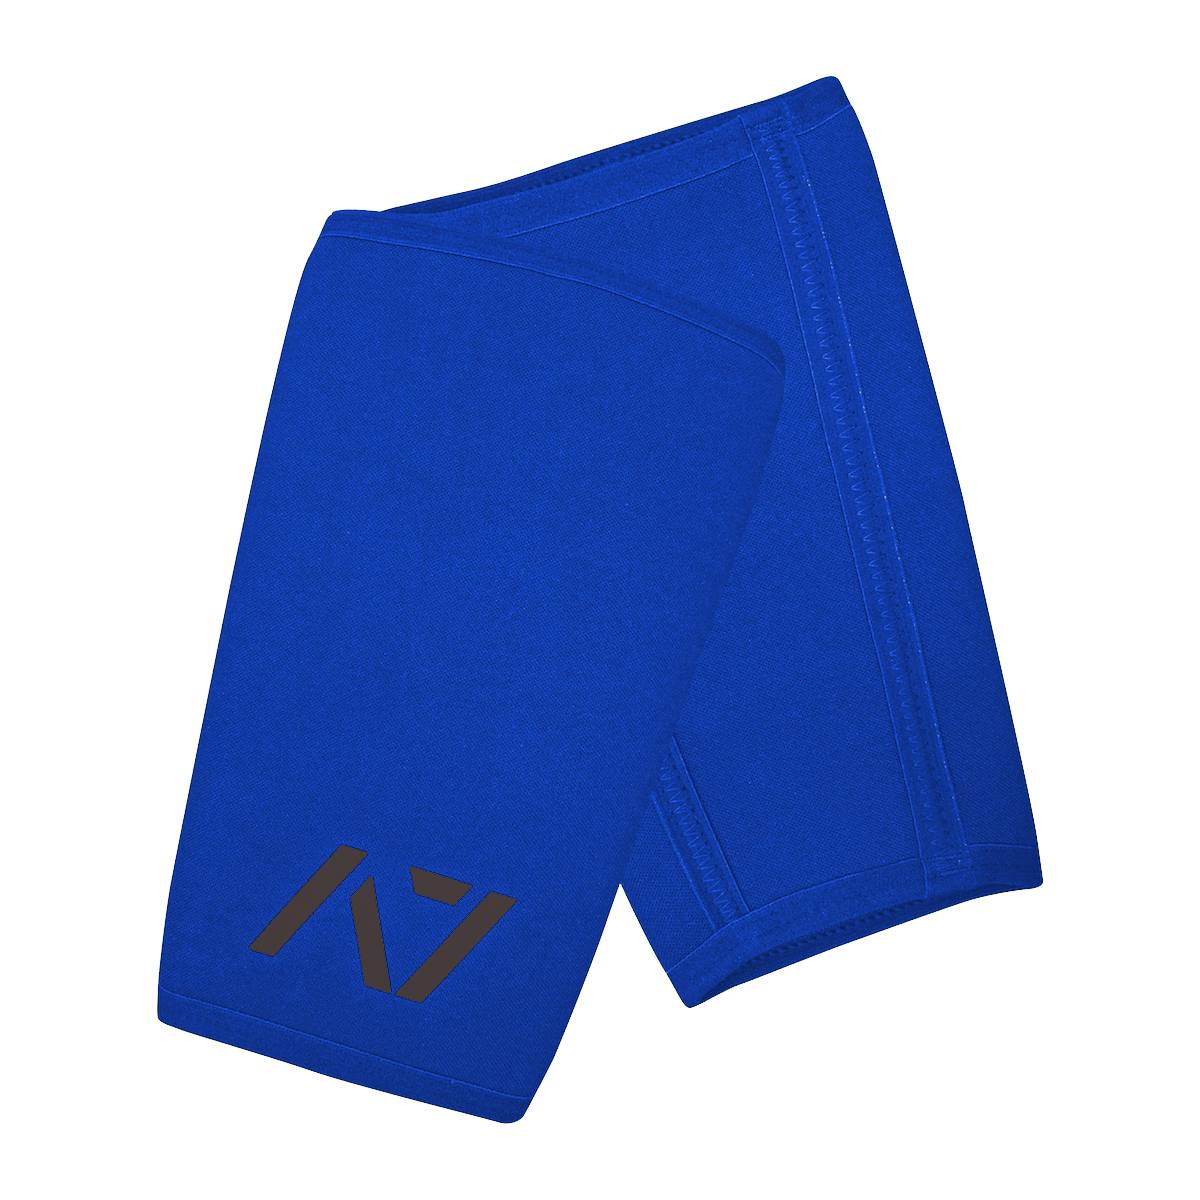 A7 IPF approved Blue CONE knee sleeves are structured with a downward cut panel on the back of the quad and calf to ensure ultimate compression at the knee joint. A7 CONE knee sleeves are IPF approved for use in all powerlifting competitions. A7 cone knee sleeves are made with high quality neoprene and the knee sleeves are sold as a pair. The double seem on the knee sleeves create a greater tension on the knee joint. Available in UK and Europe including France, Italy, Germany, Sweden and Poland